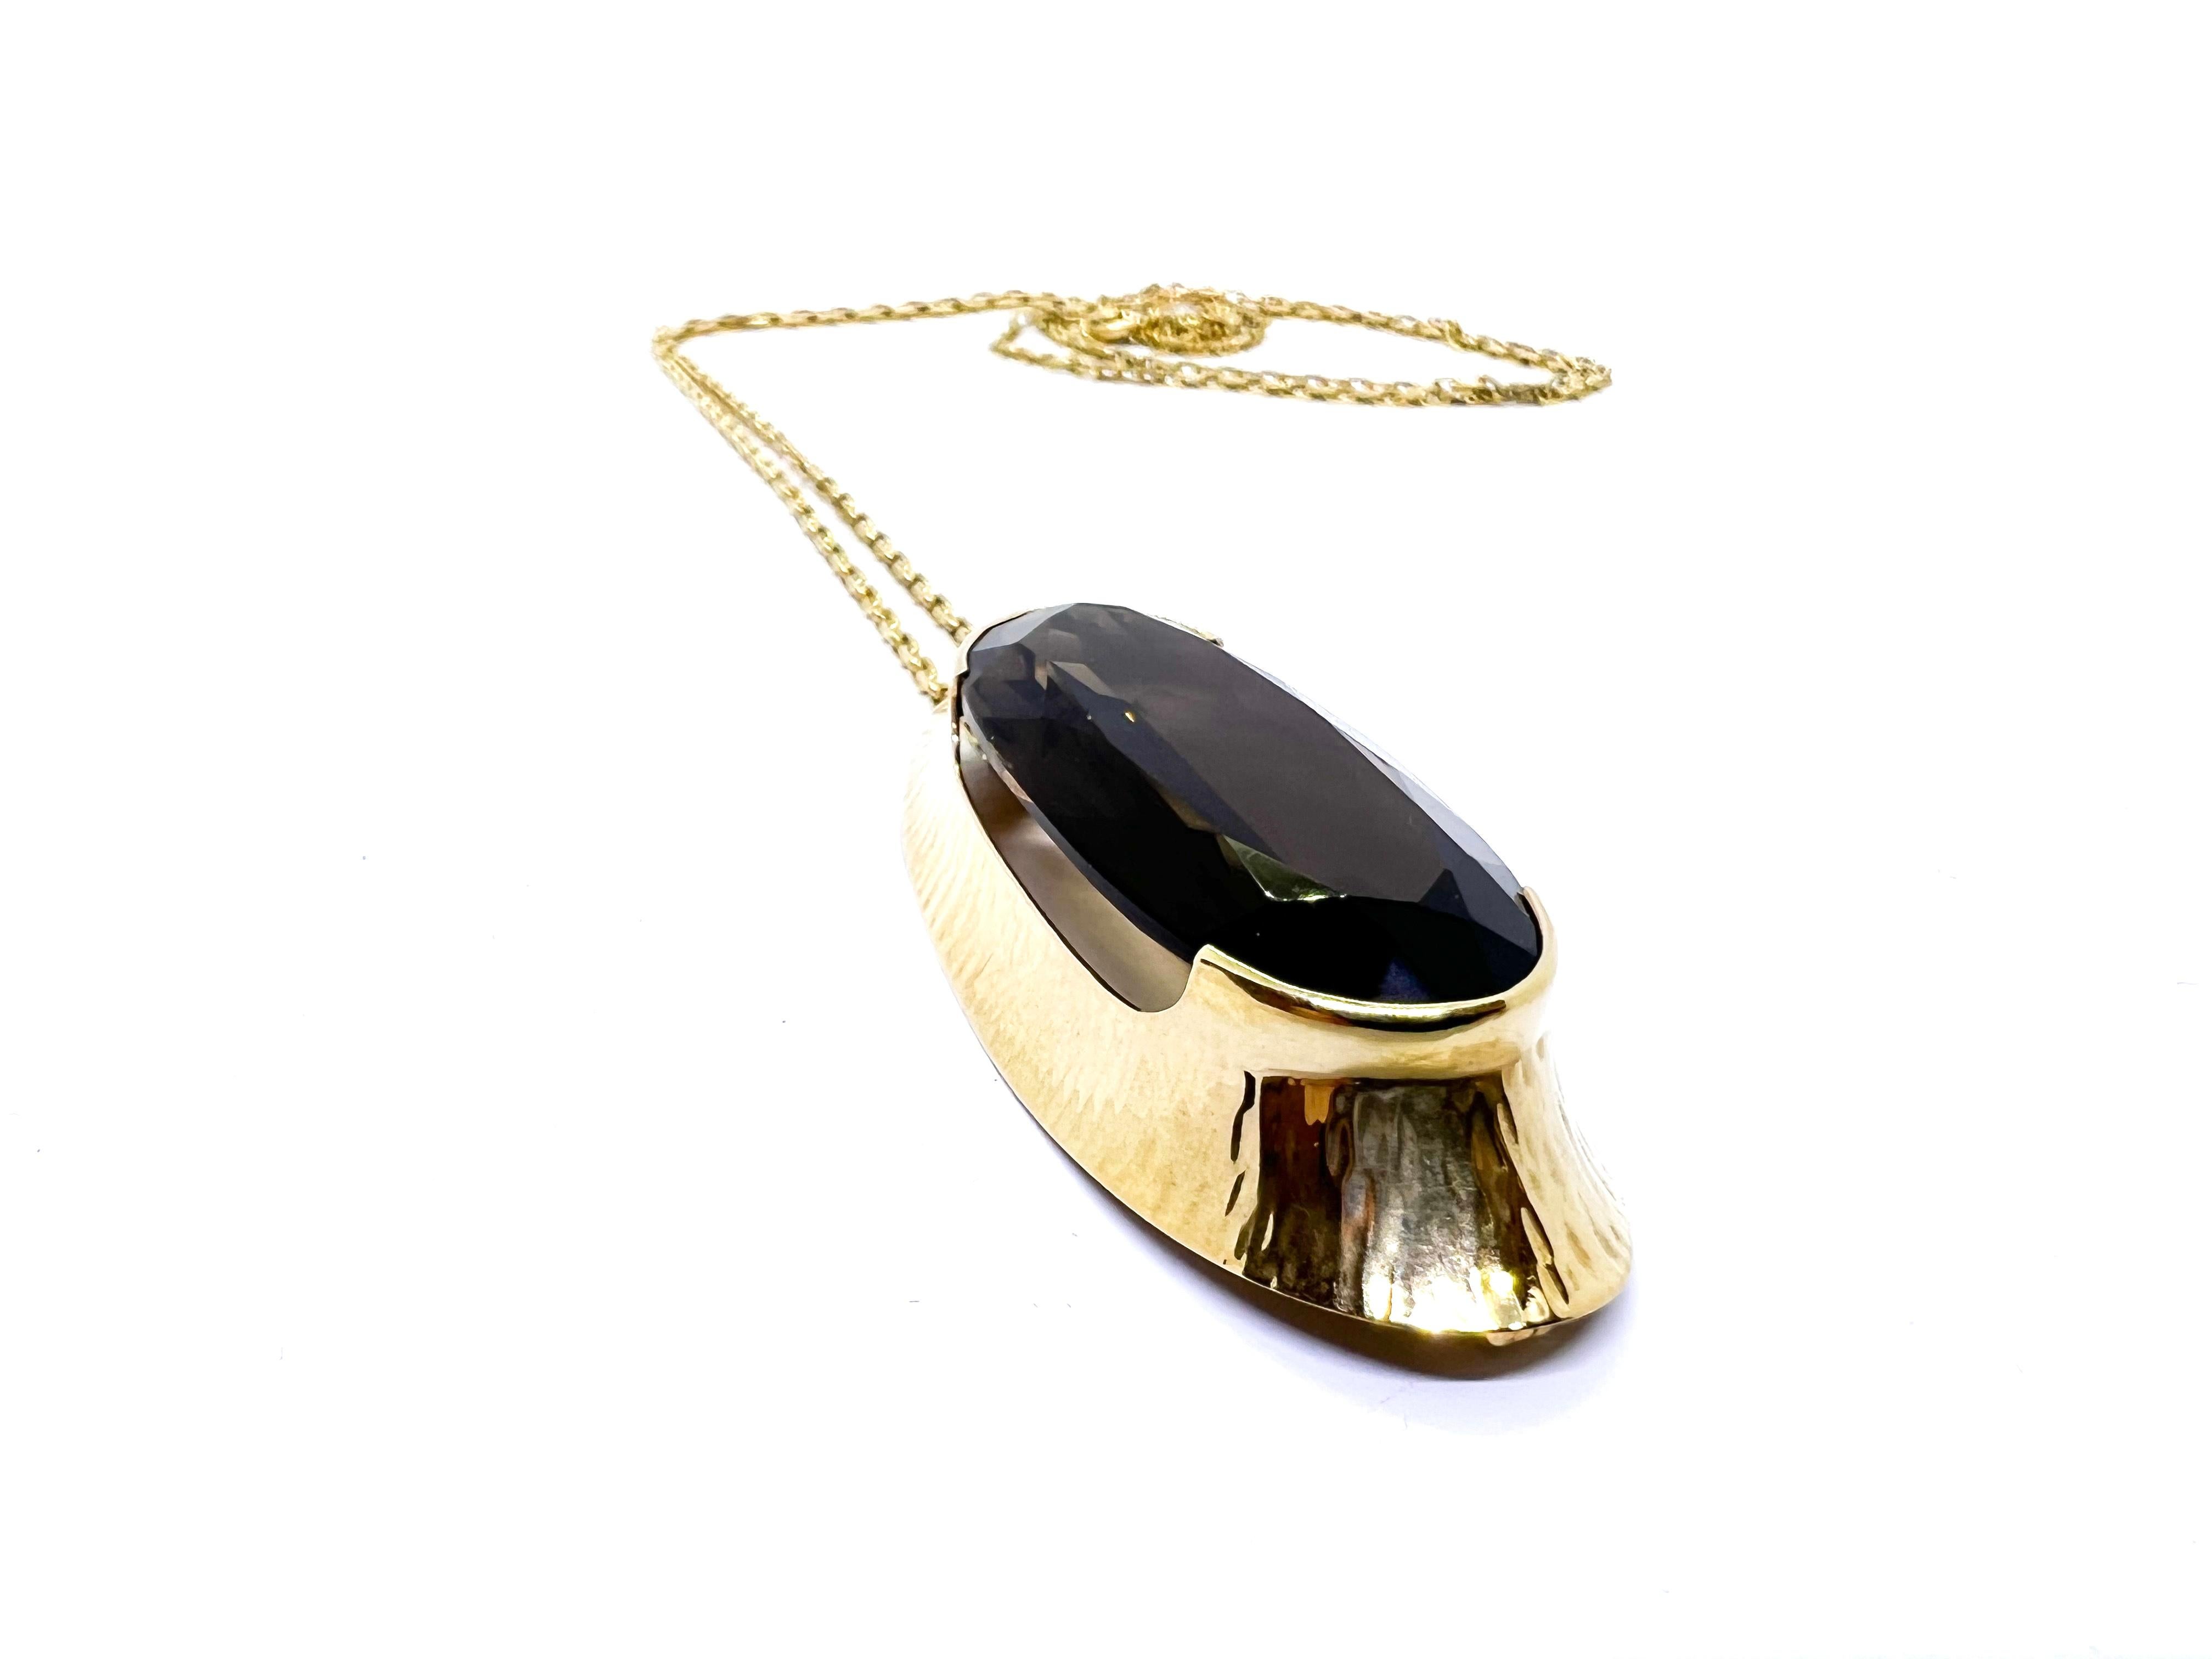 14 Karat Gold Elis Kauppi Kupittaan Kulta Brooch. Really big Smoky Quartz. Weight 13.8g
Comes with Anchor gold chain length 82.5cm thickness 2mm 14 karat Gold 585 Weight 10.3g
This can also be used as a pendant when you put the chain behind the